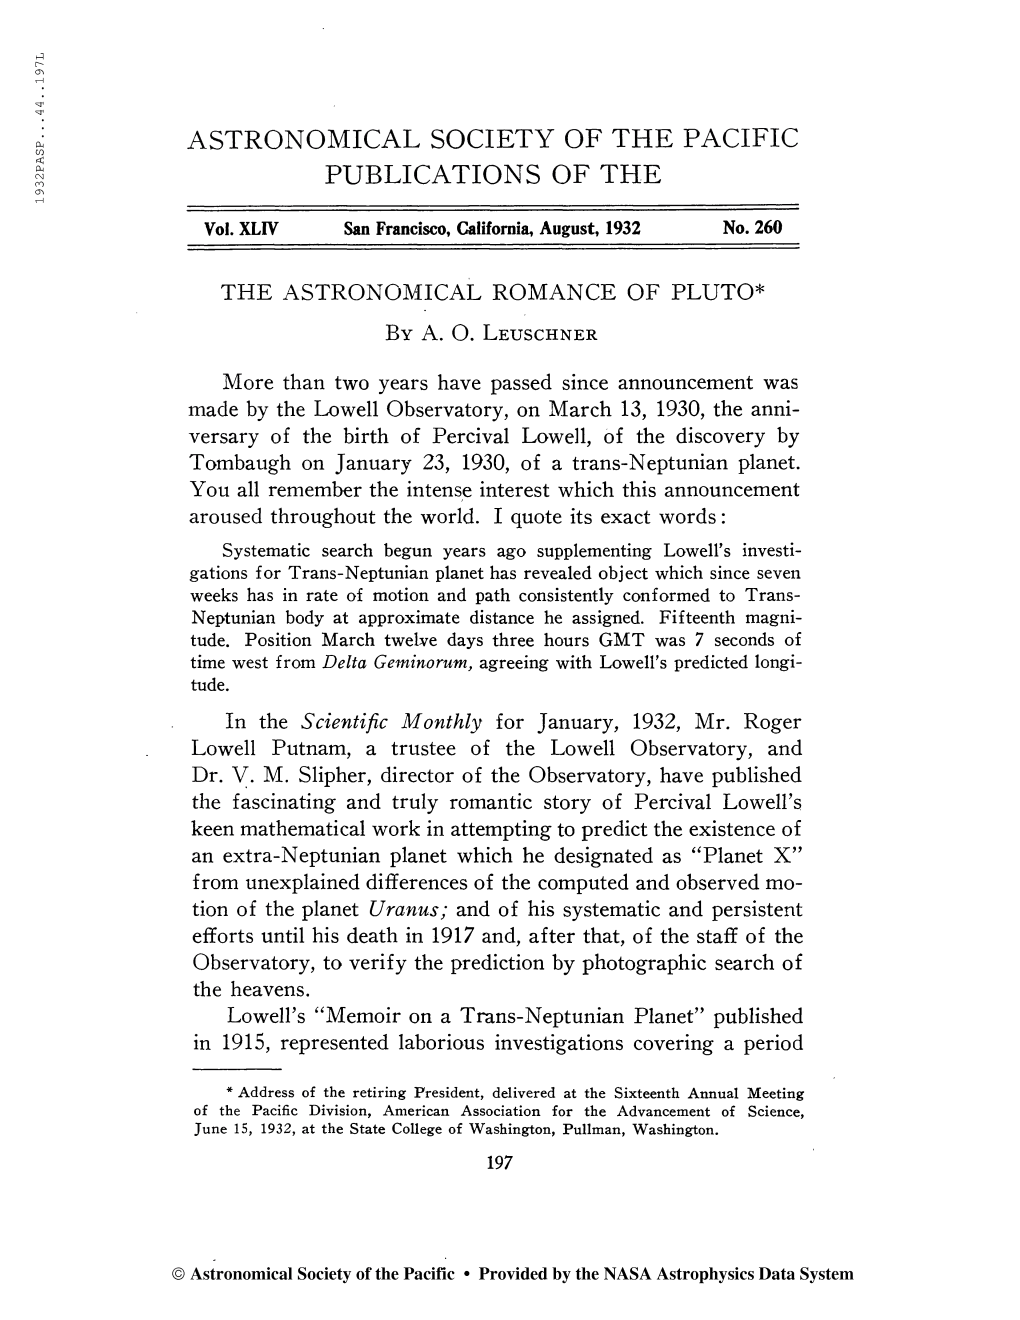 Astronomical Society of the Pacific Publications of The